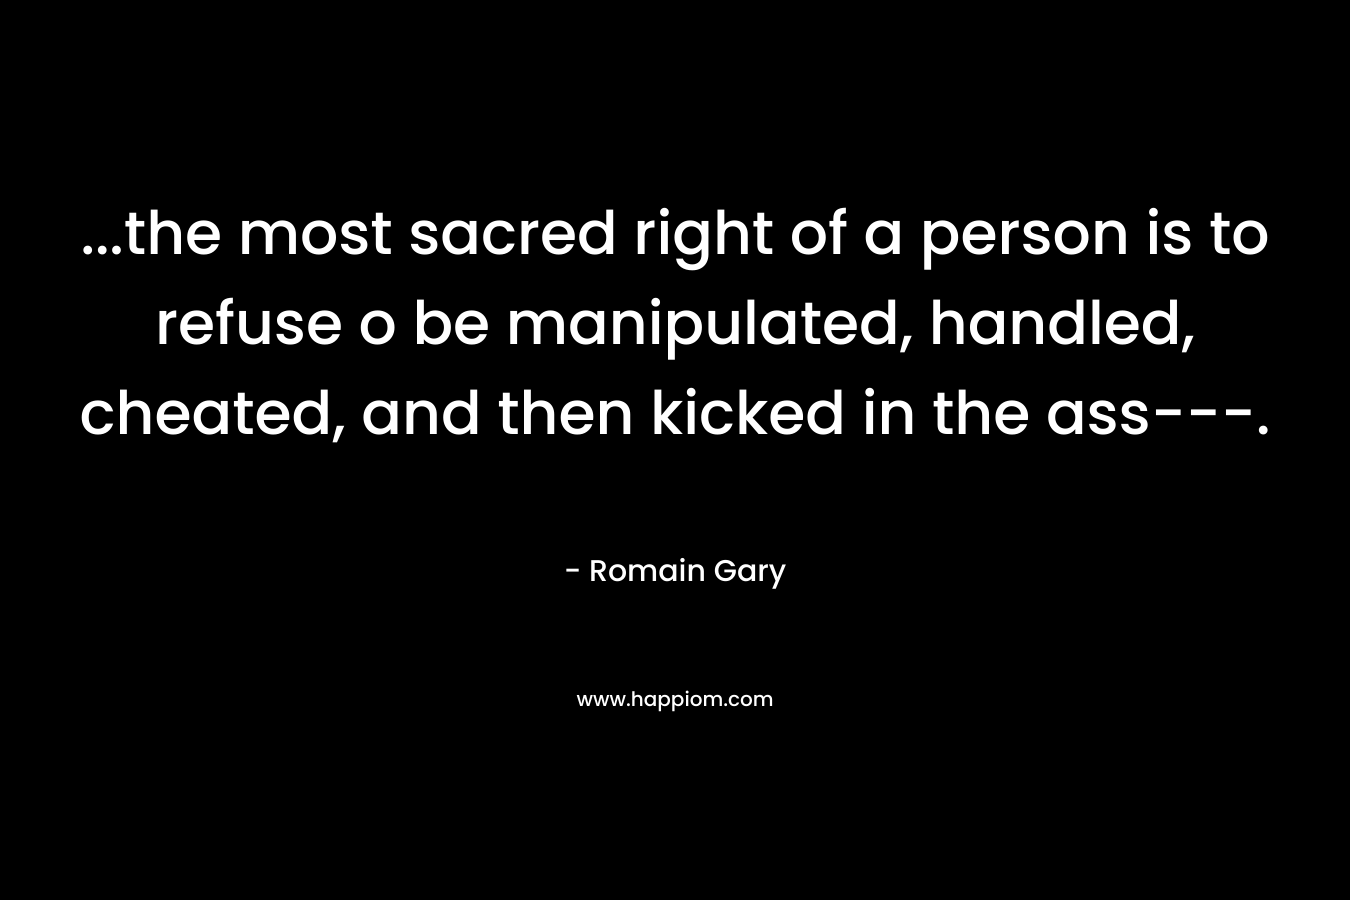 …the most sacred right of a person is to refuse o be manipulated, handled, cheated, and then kicked in the ass—. – Romain Gary